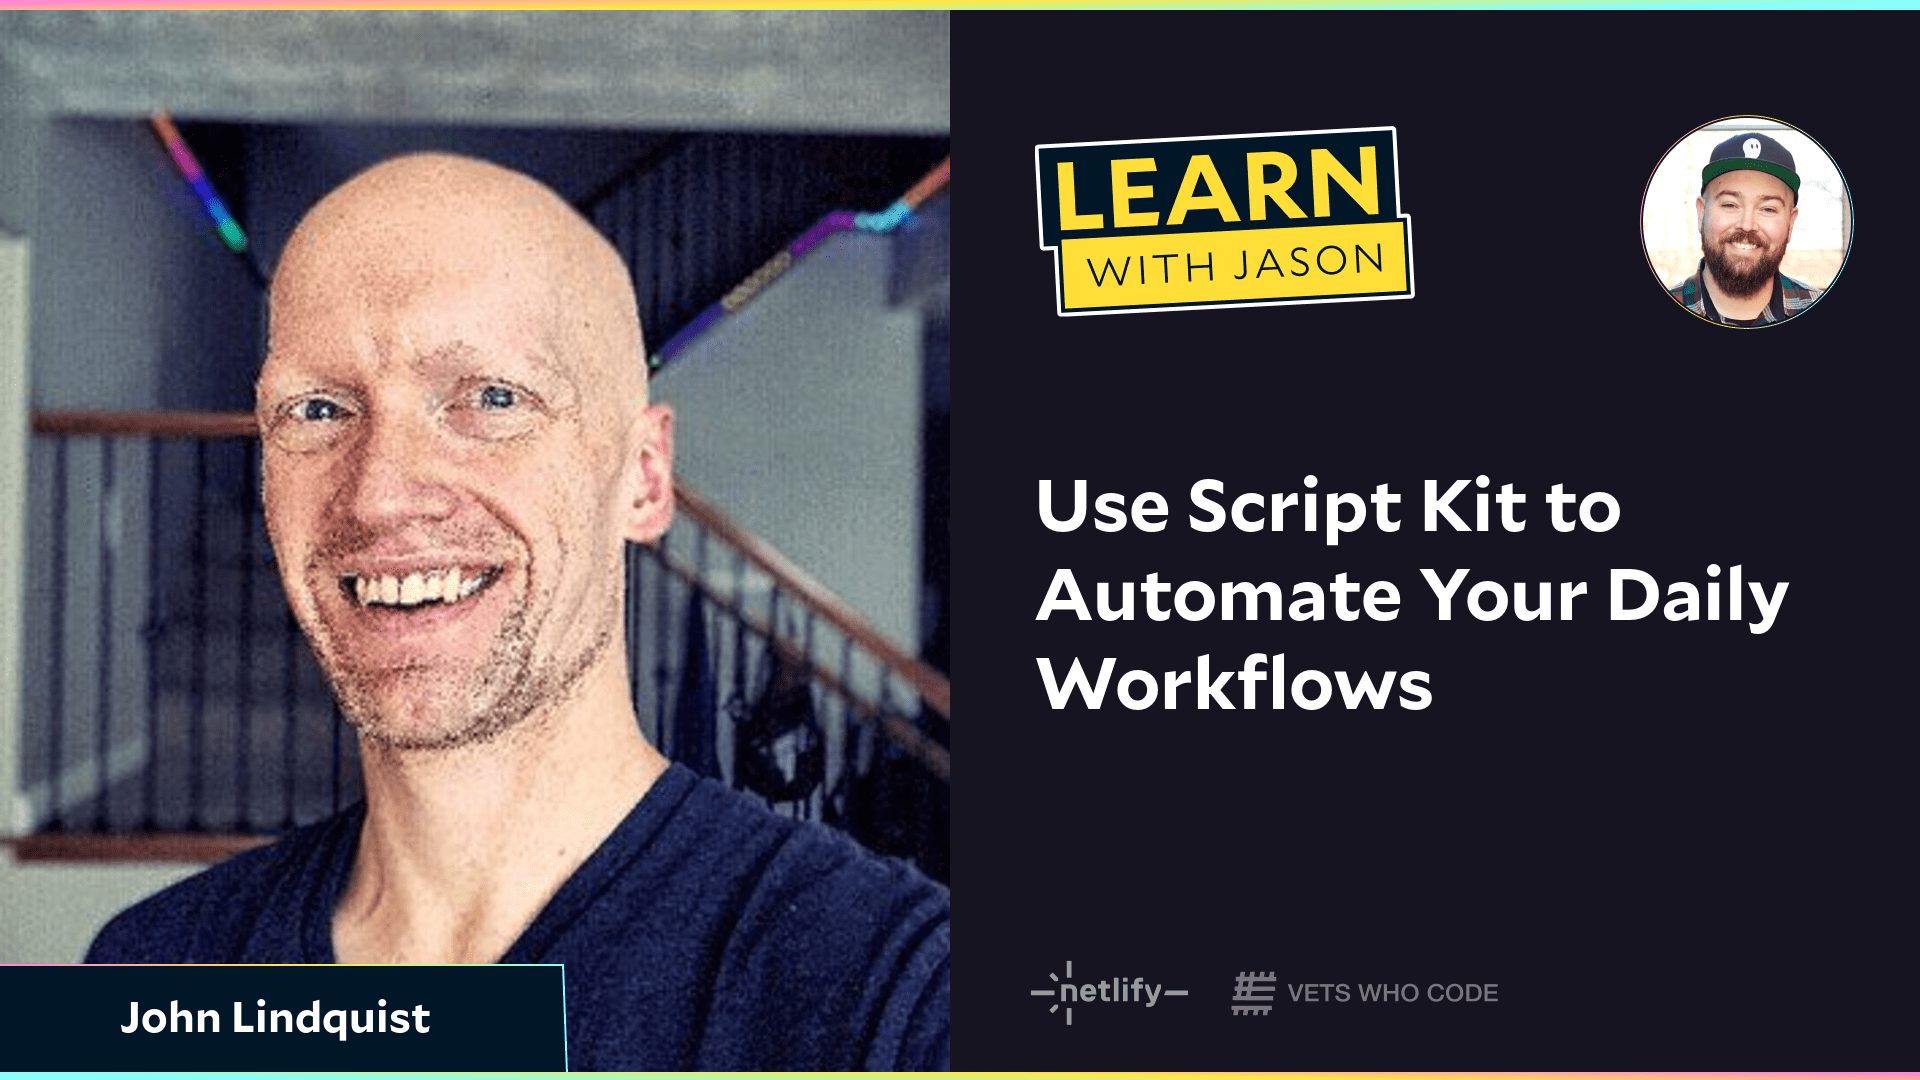 Use Script Kit to Automate Your Daily Workflows (with John Lindquist)